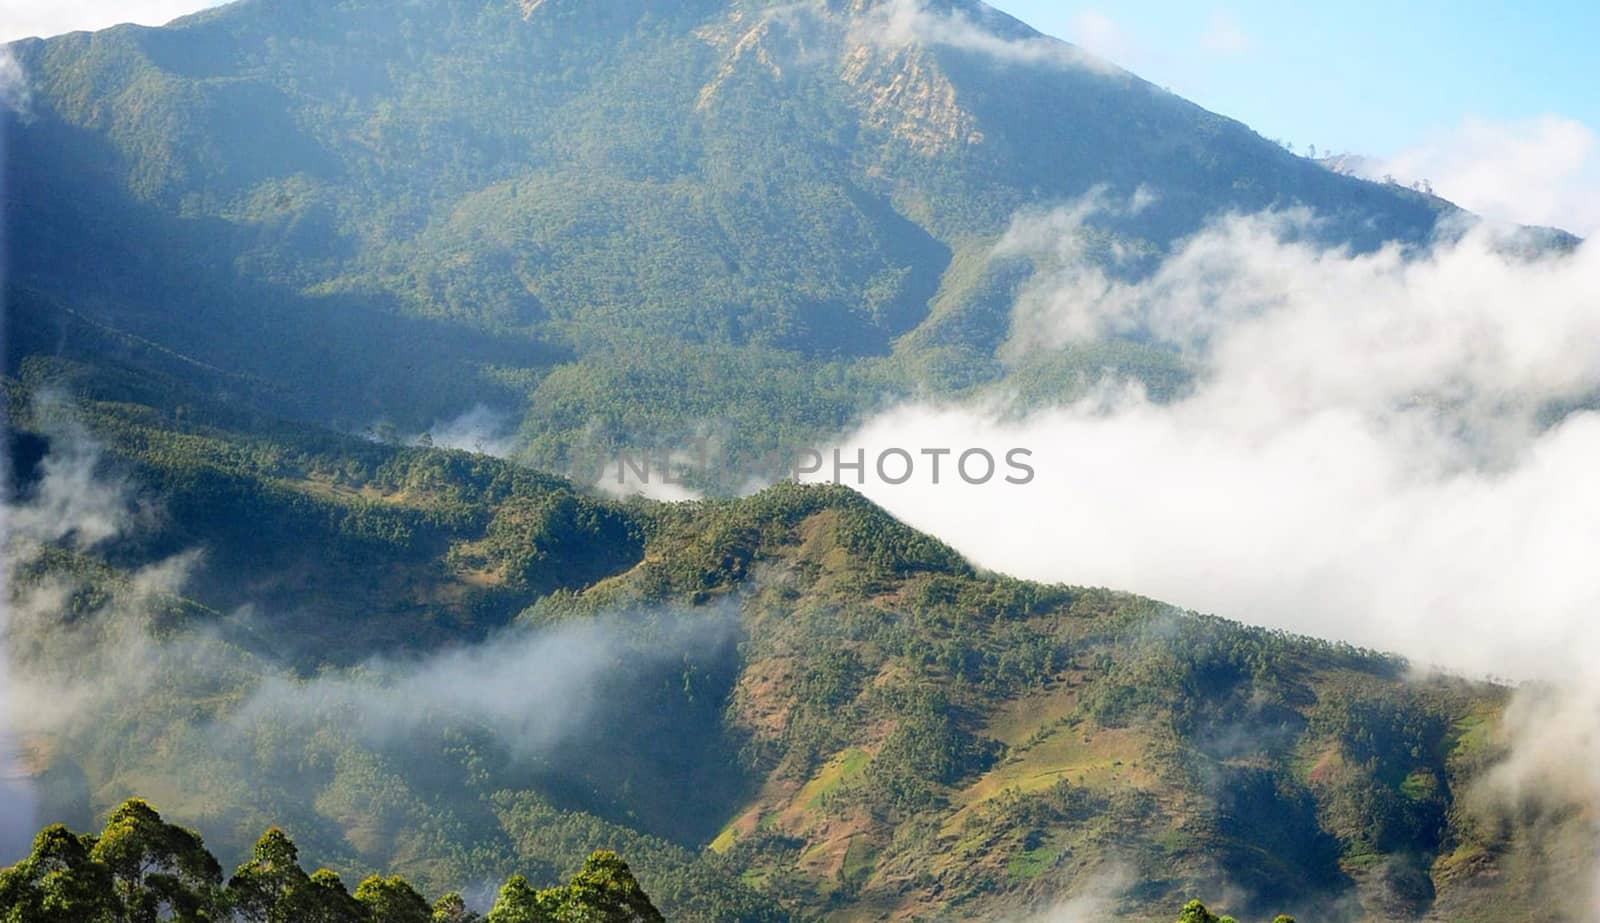 Beautiful pictures of Timor-Leste